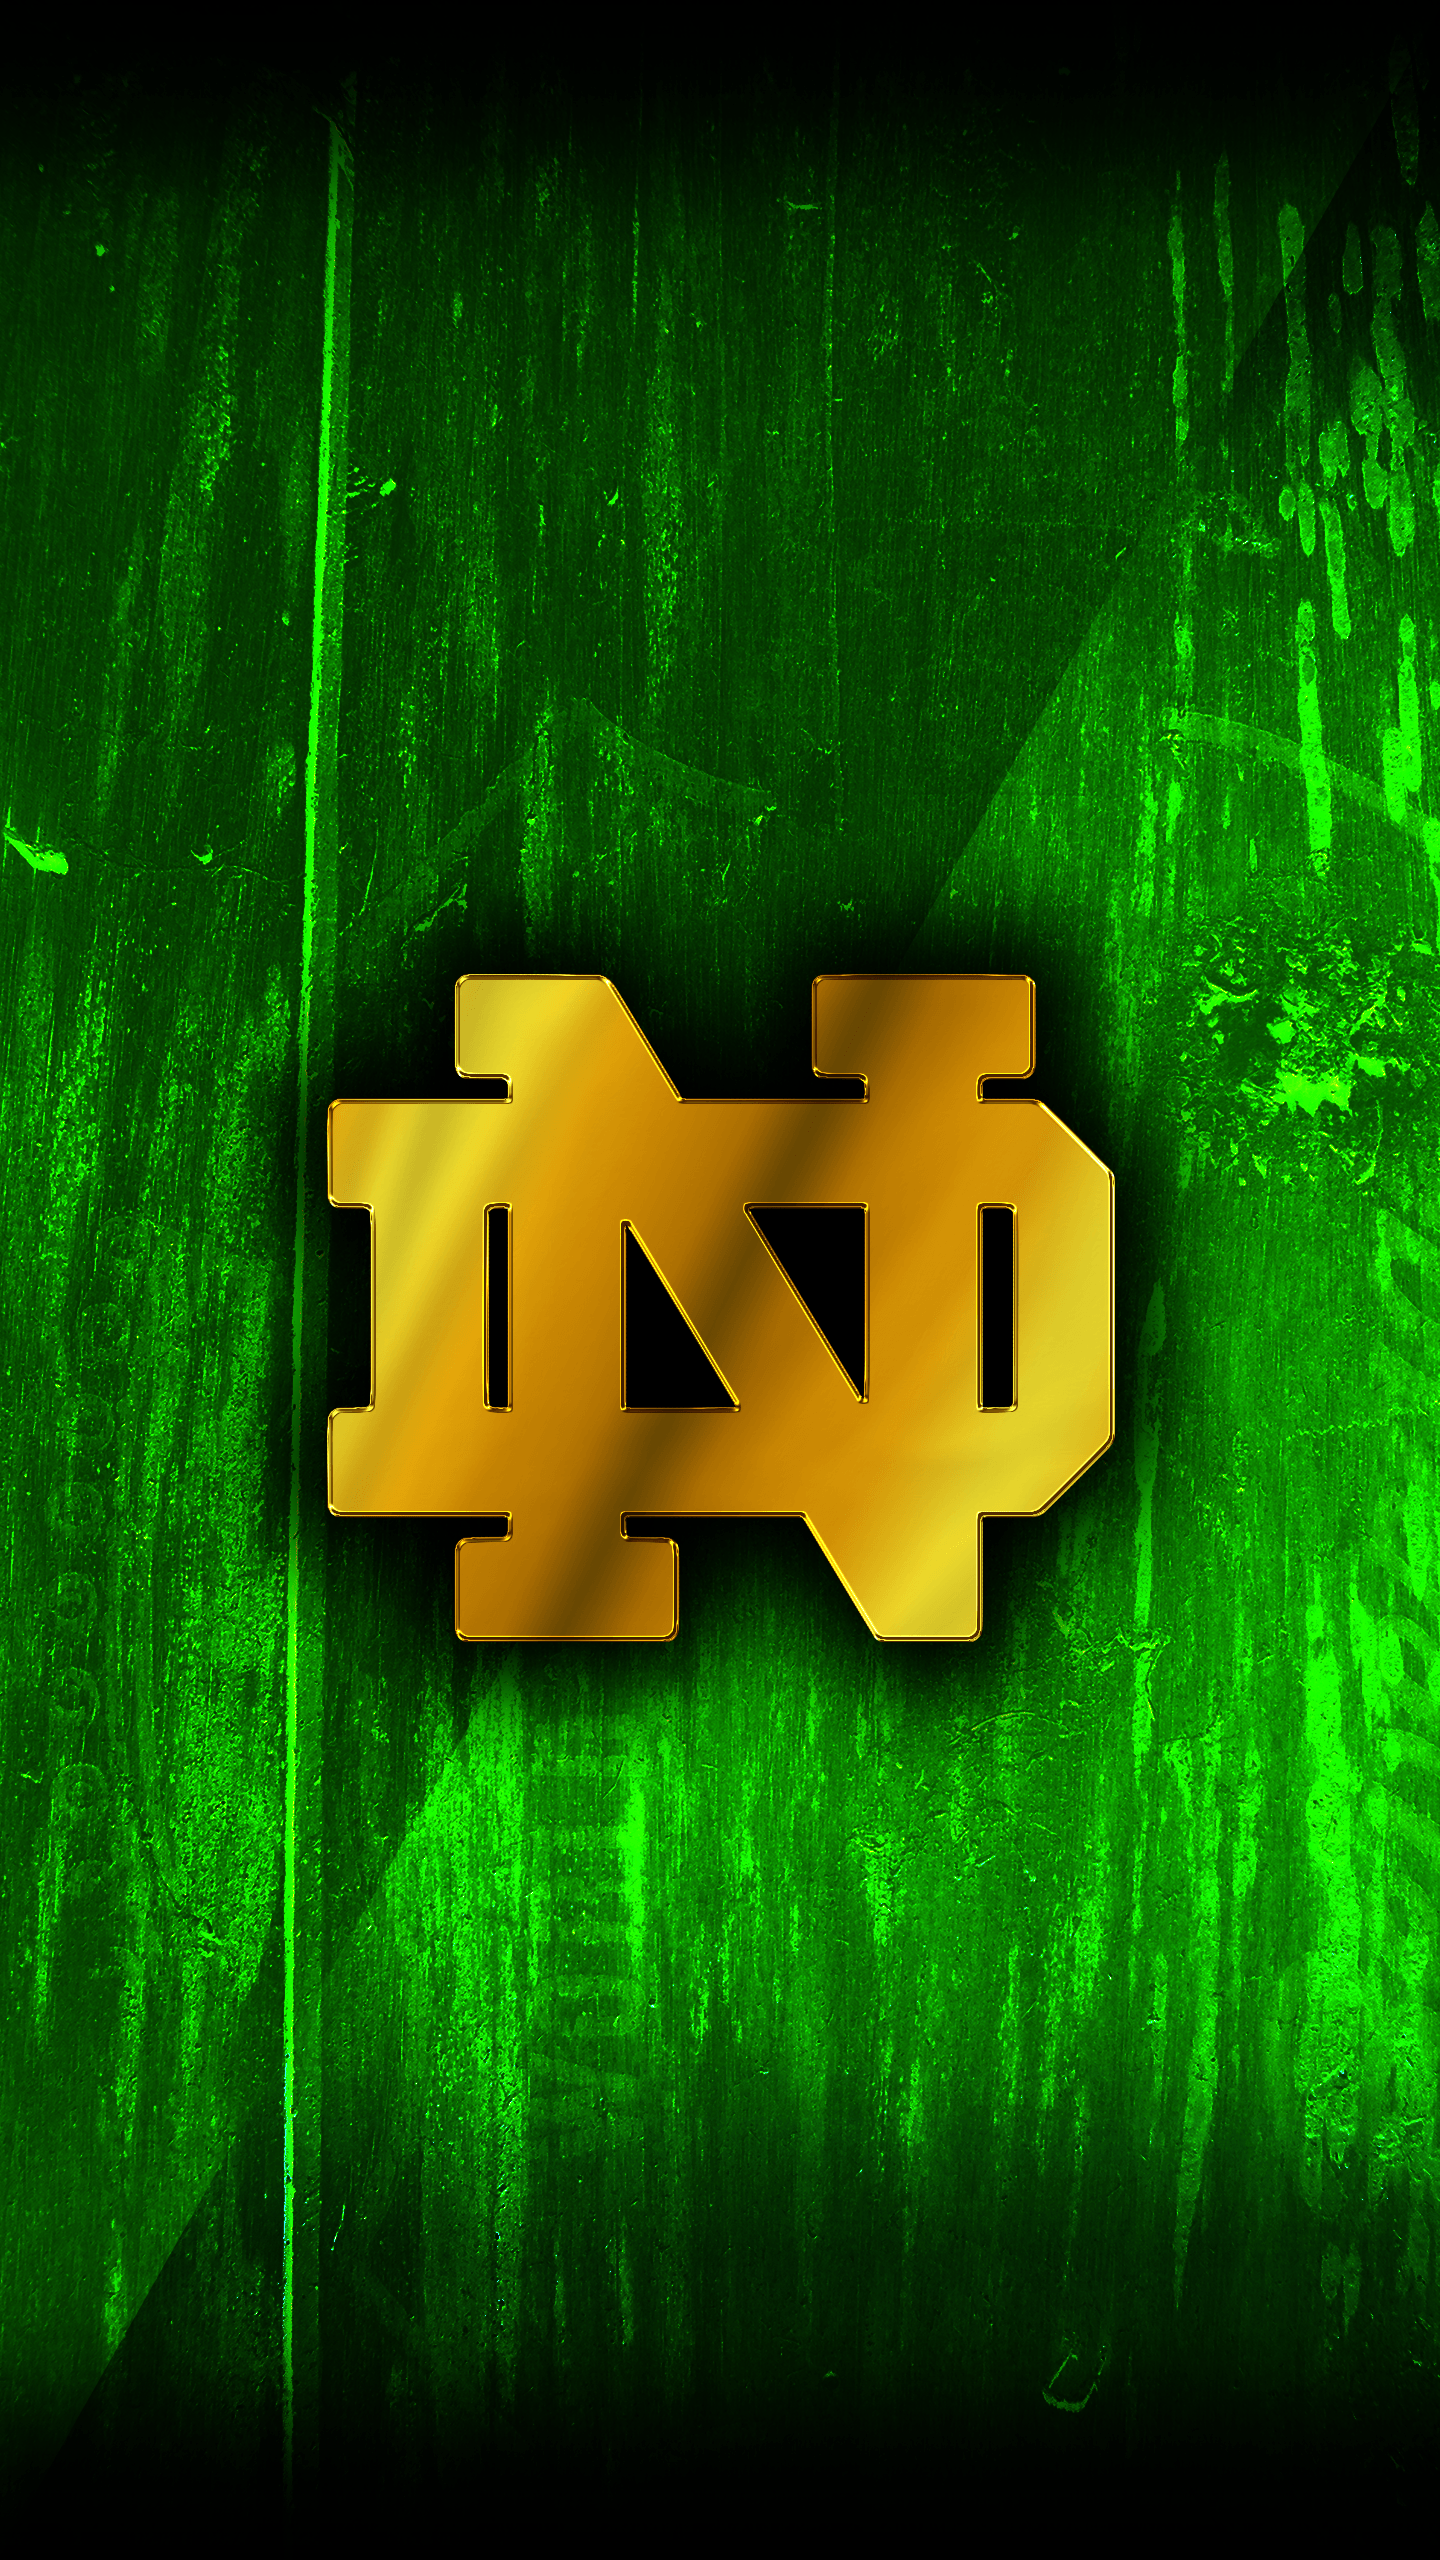 Download wallpapers Notre Dame Fighting Irish golden logo NCAA blue  metal background american football club Notre Dame Fighting Irish logo  american football USA for desktop with resolution 2880x1800 High Quality  HD pictures